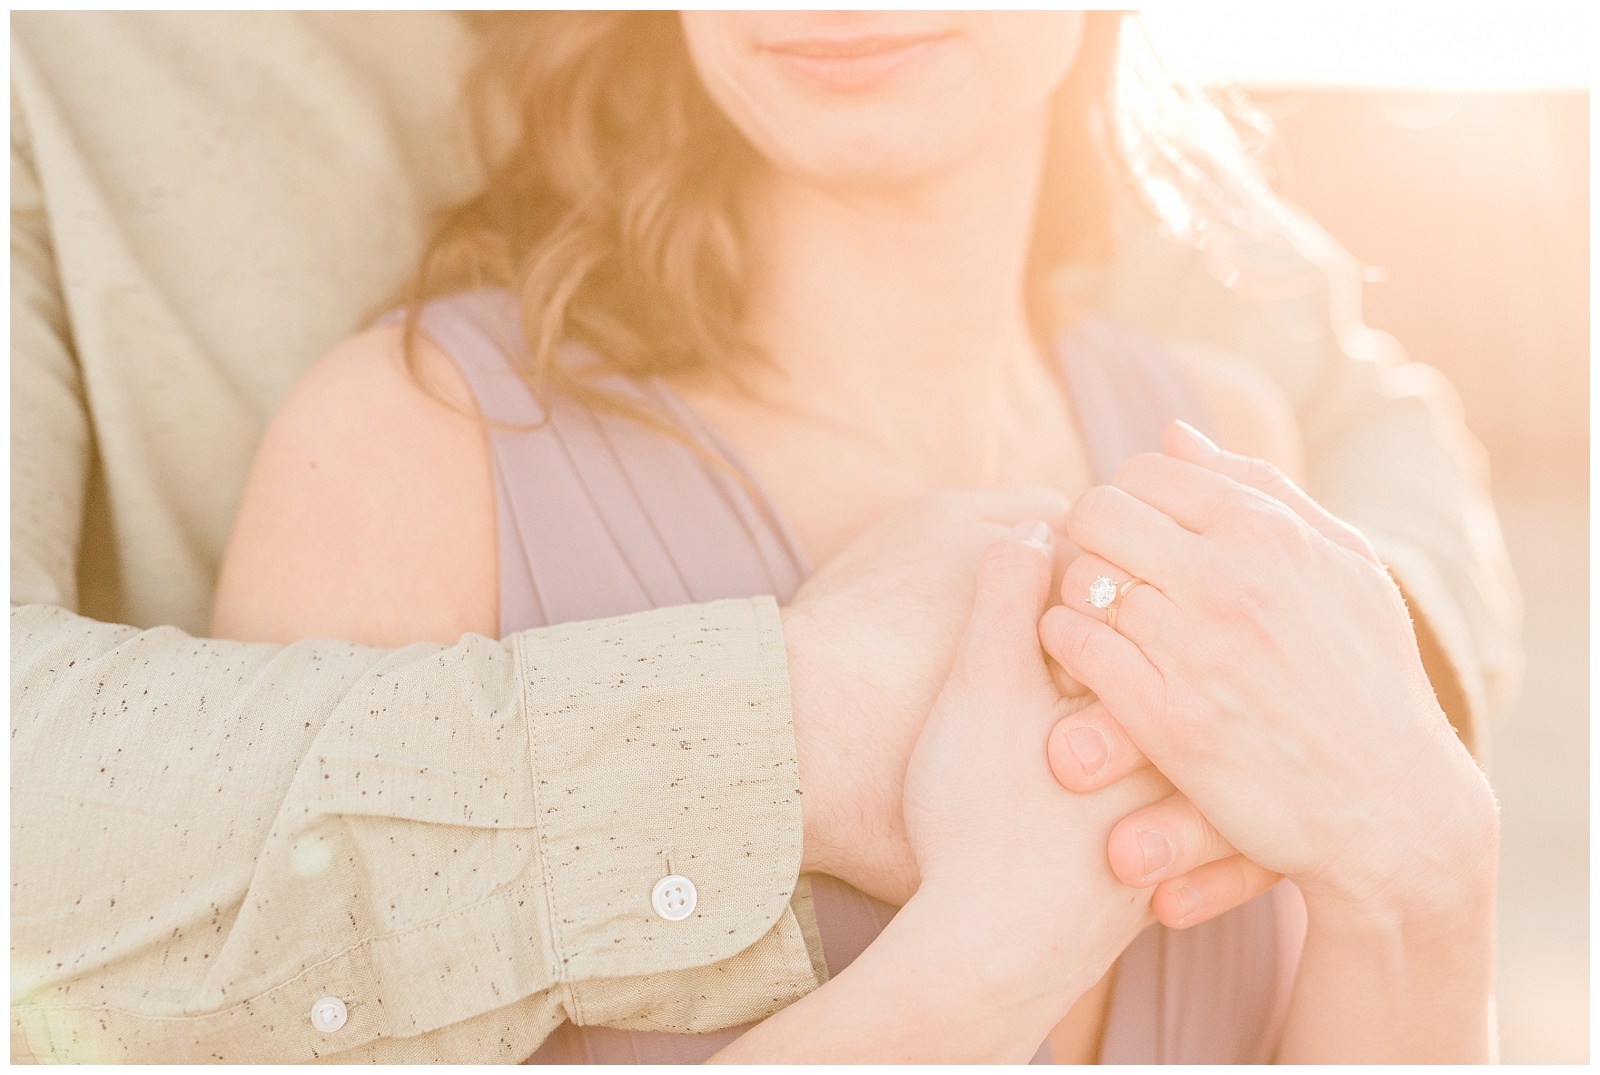 New Jersey, Engagement Session, Asbury Park, NJ, Wedding Photographer, Springtime, Boardwalk, Light and Airy, Golden Hour